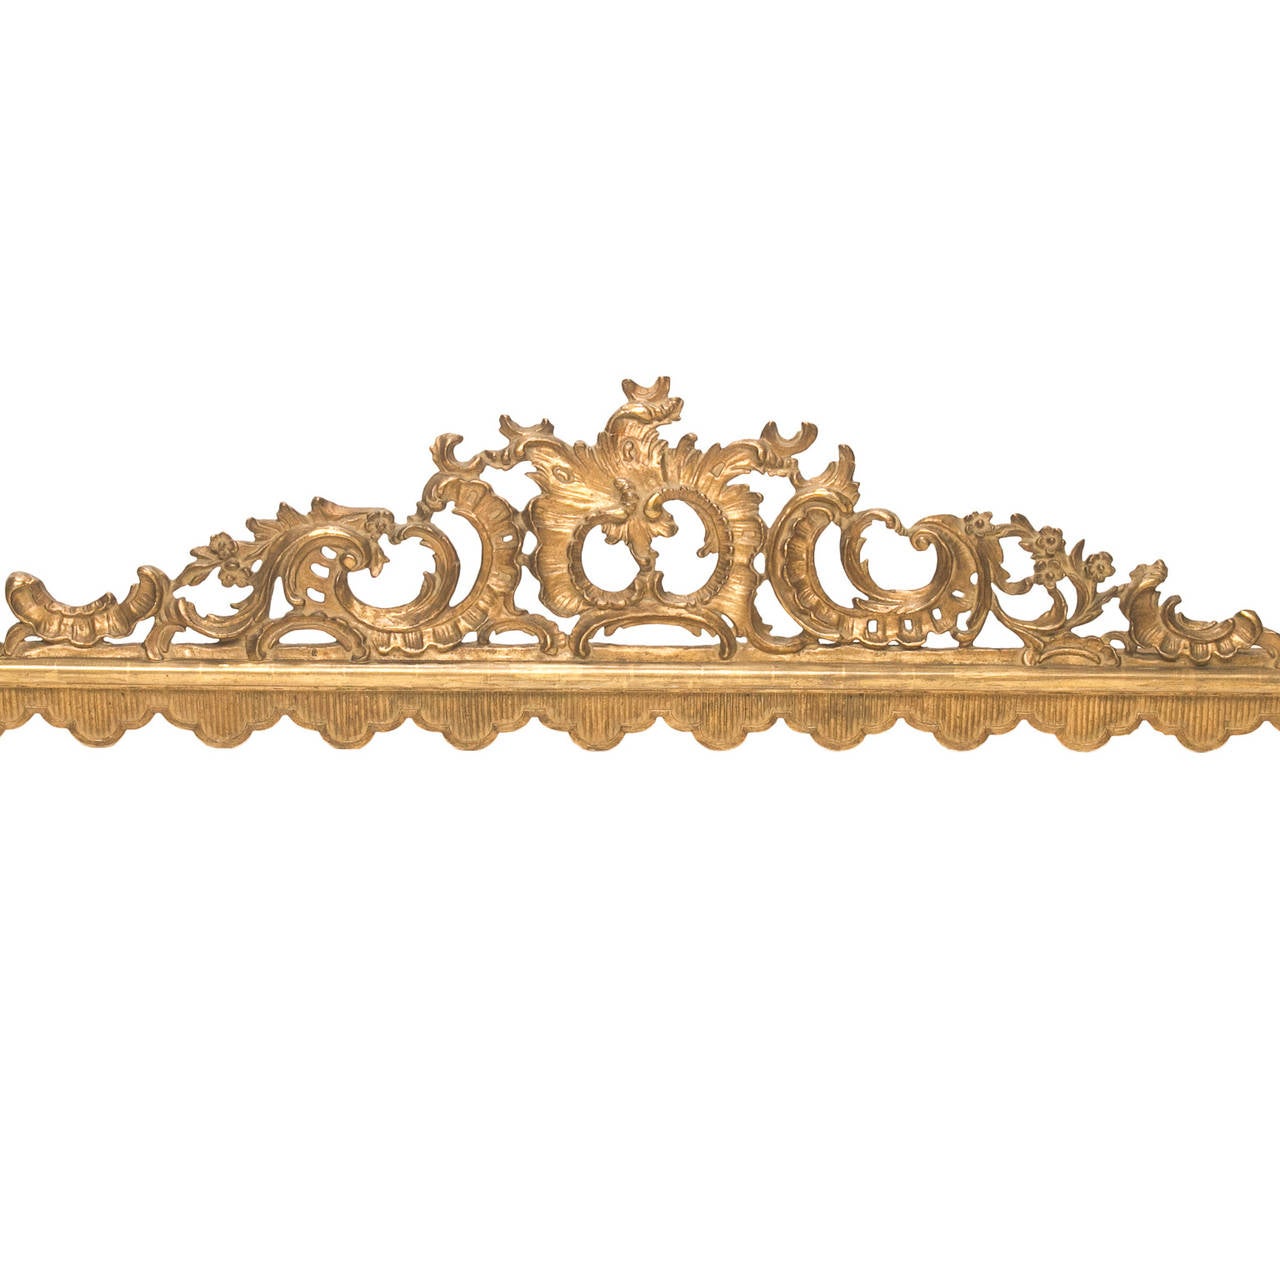 A superb and large Italian carved valance (large enough for a king-size bed) gilded wood and Baroque style. This was purchased from Naples, Italy. Very nice condition and was in use inside the home. Impressive piece and notice the size! circa